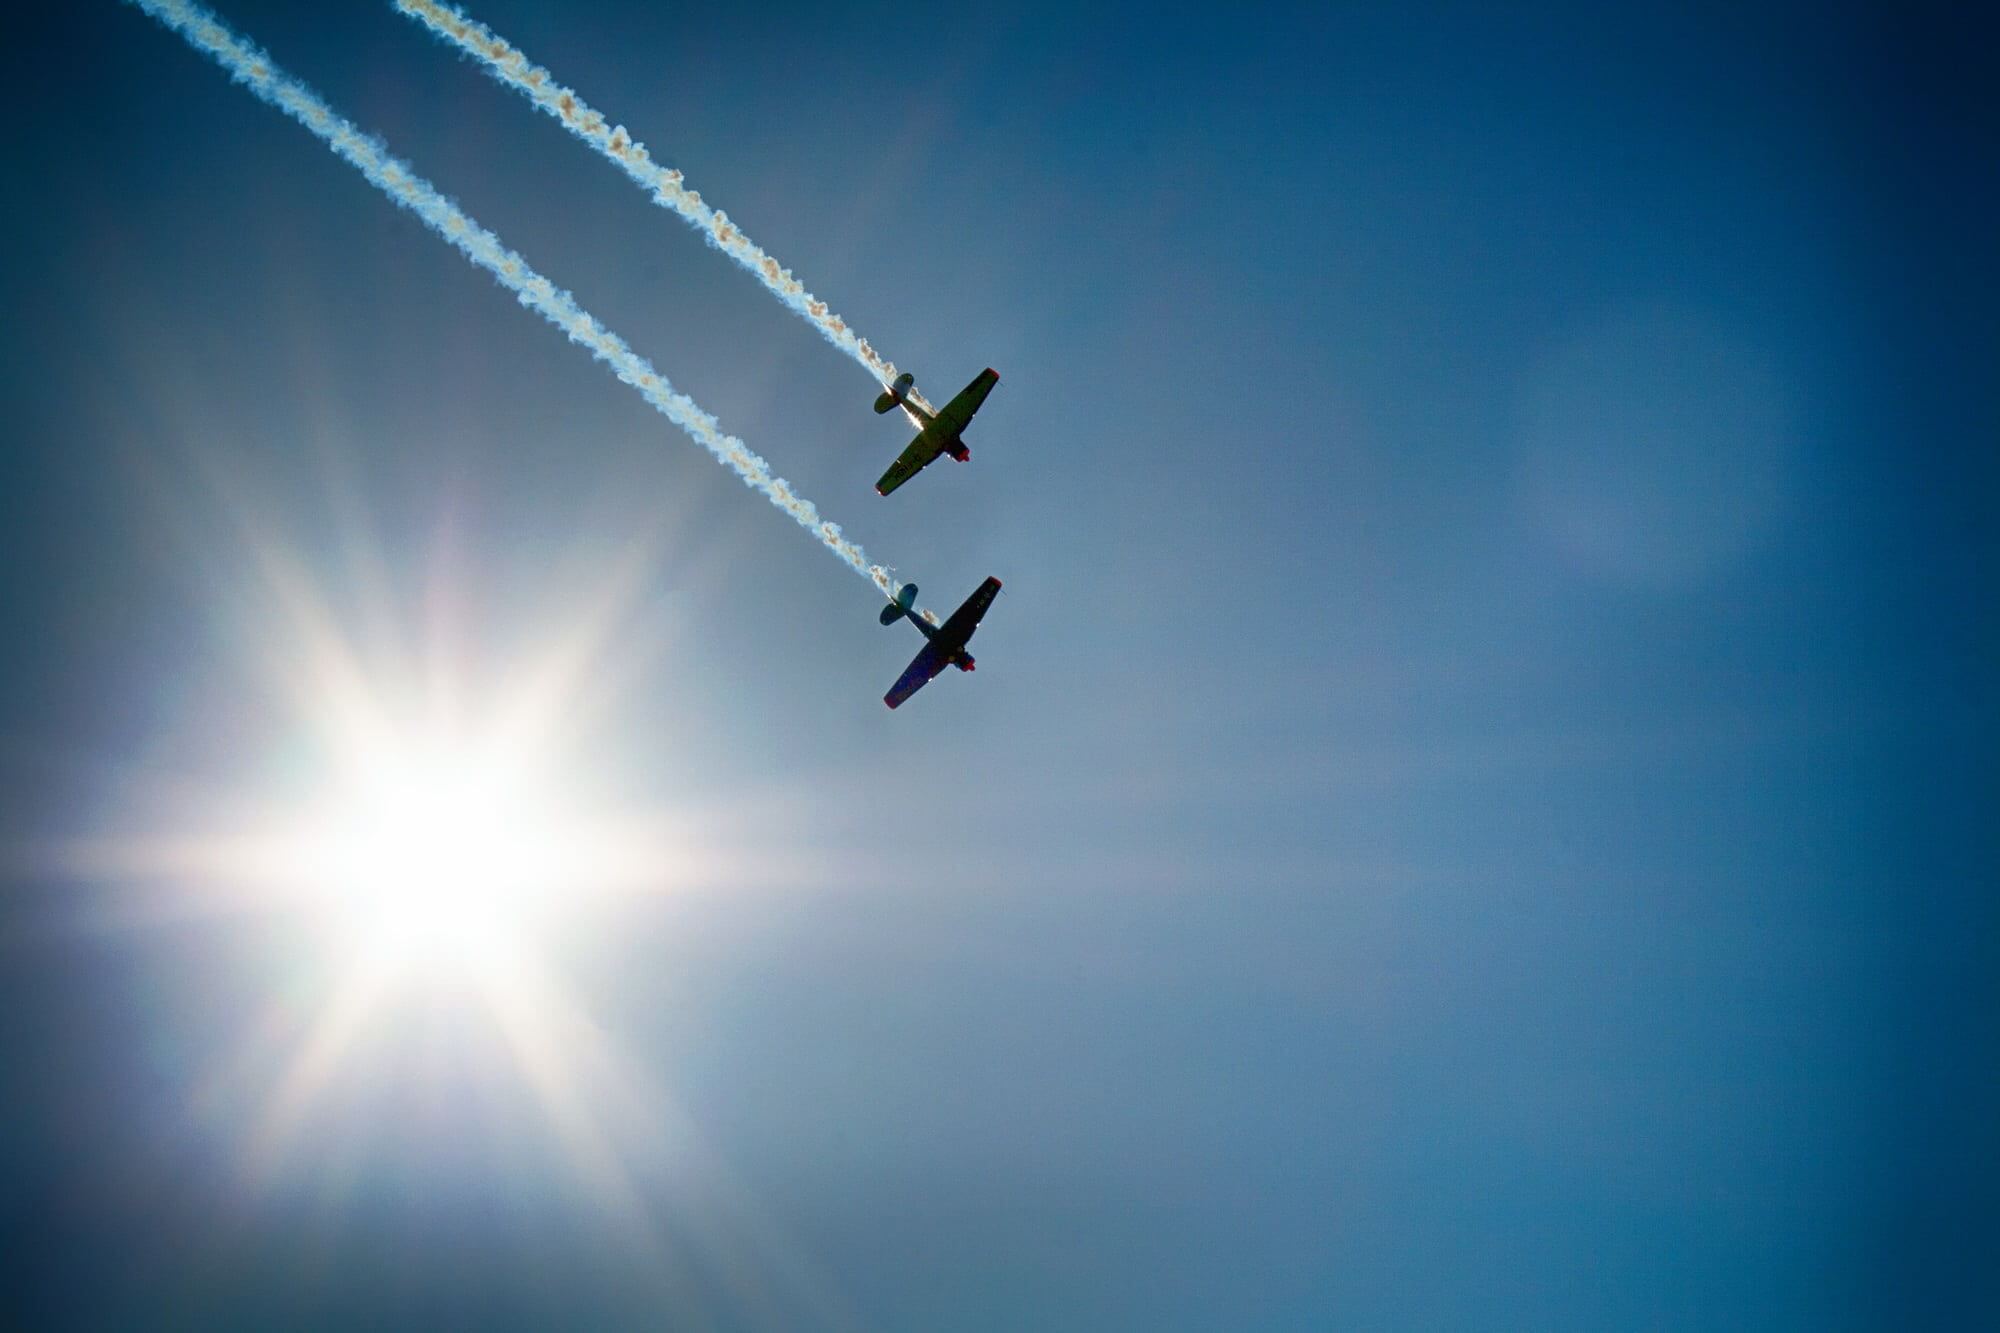 Two planes flying in tandem at air show